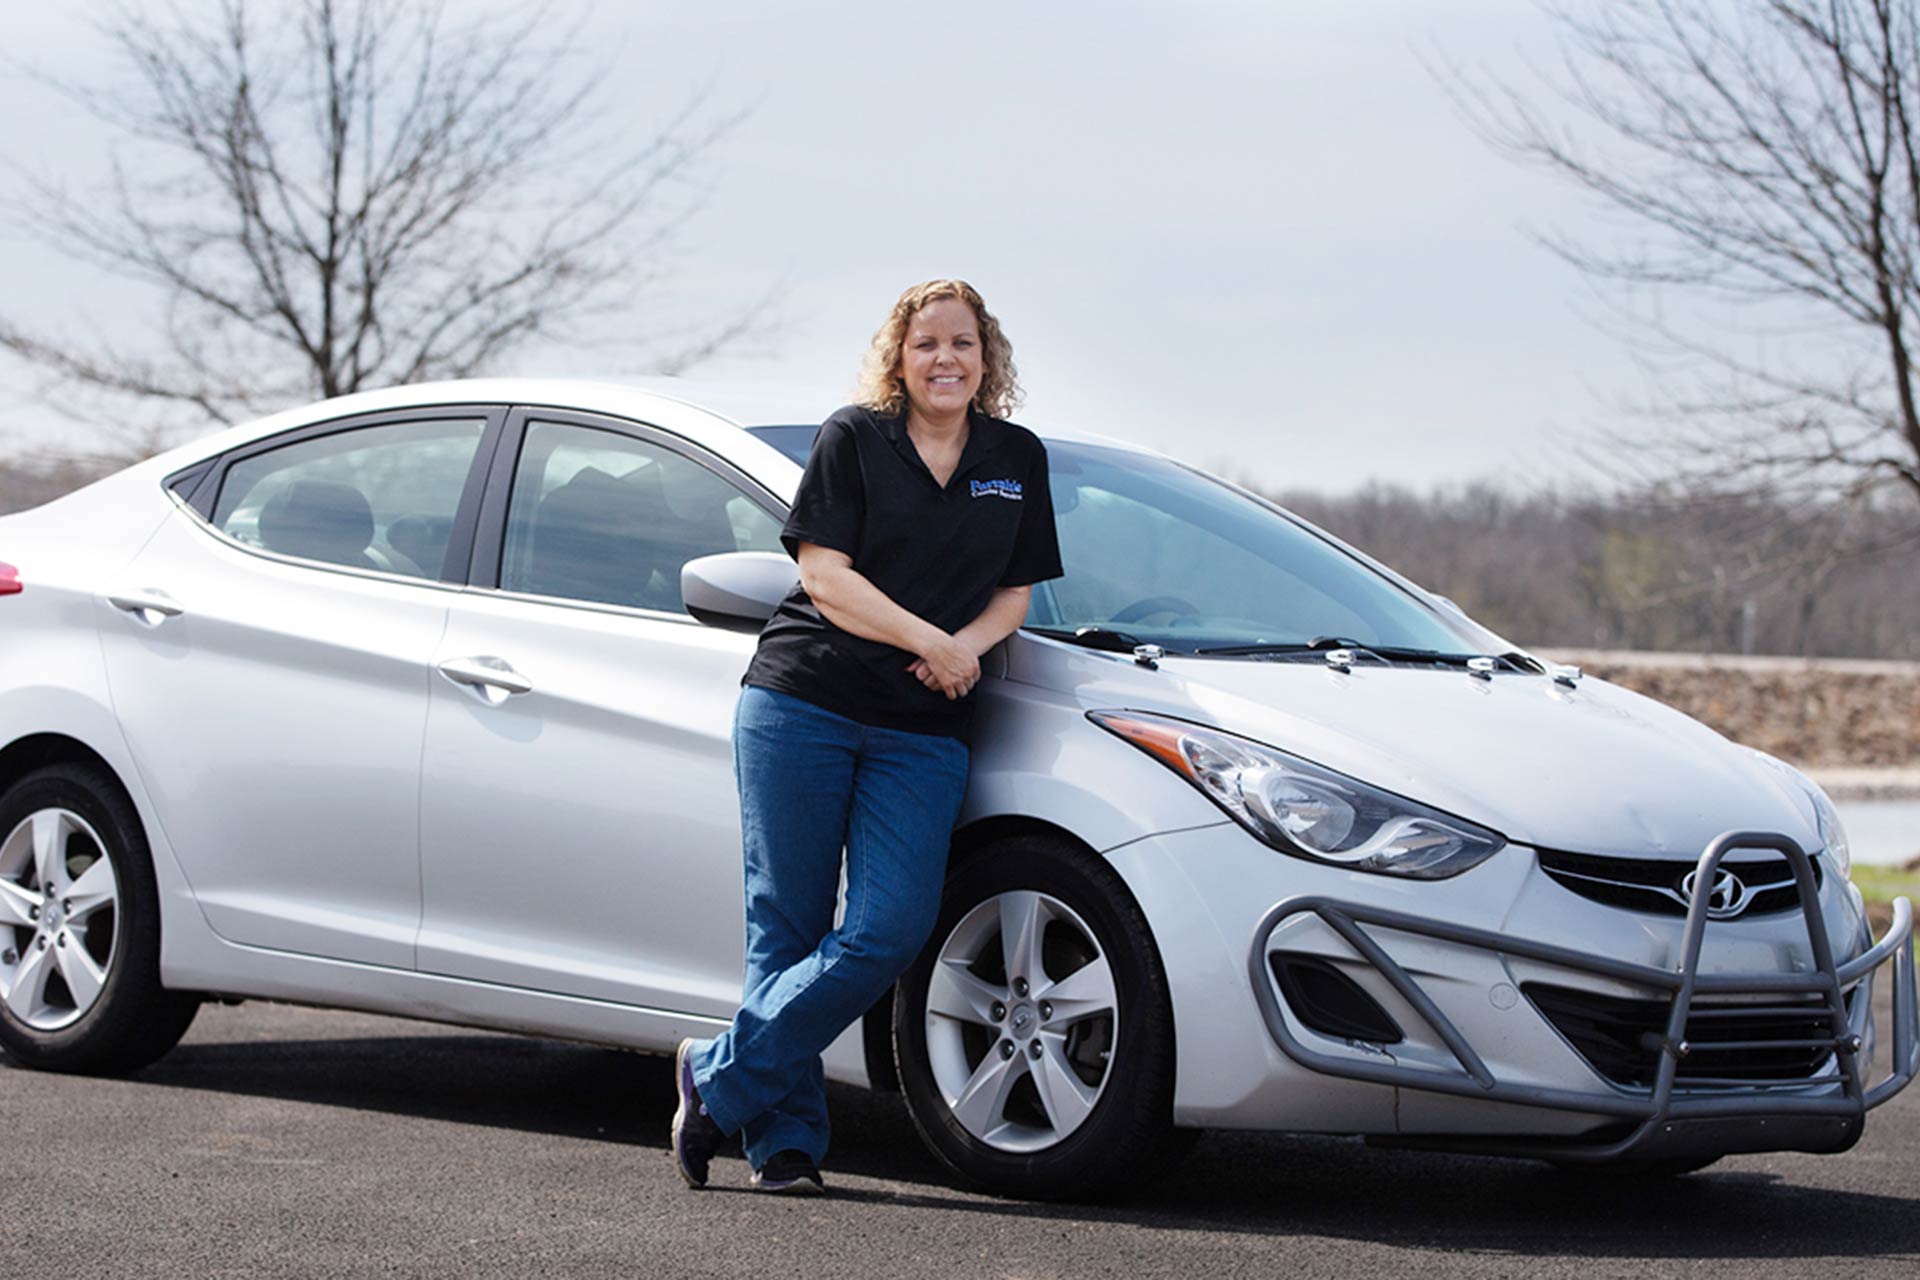 Hyundai driver clocks up one million miles in five years